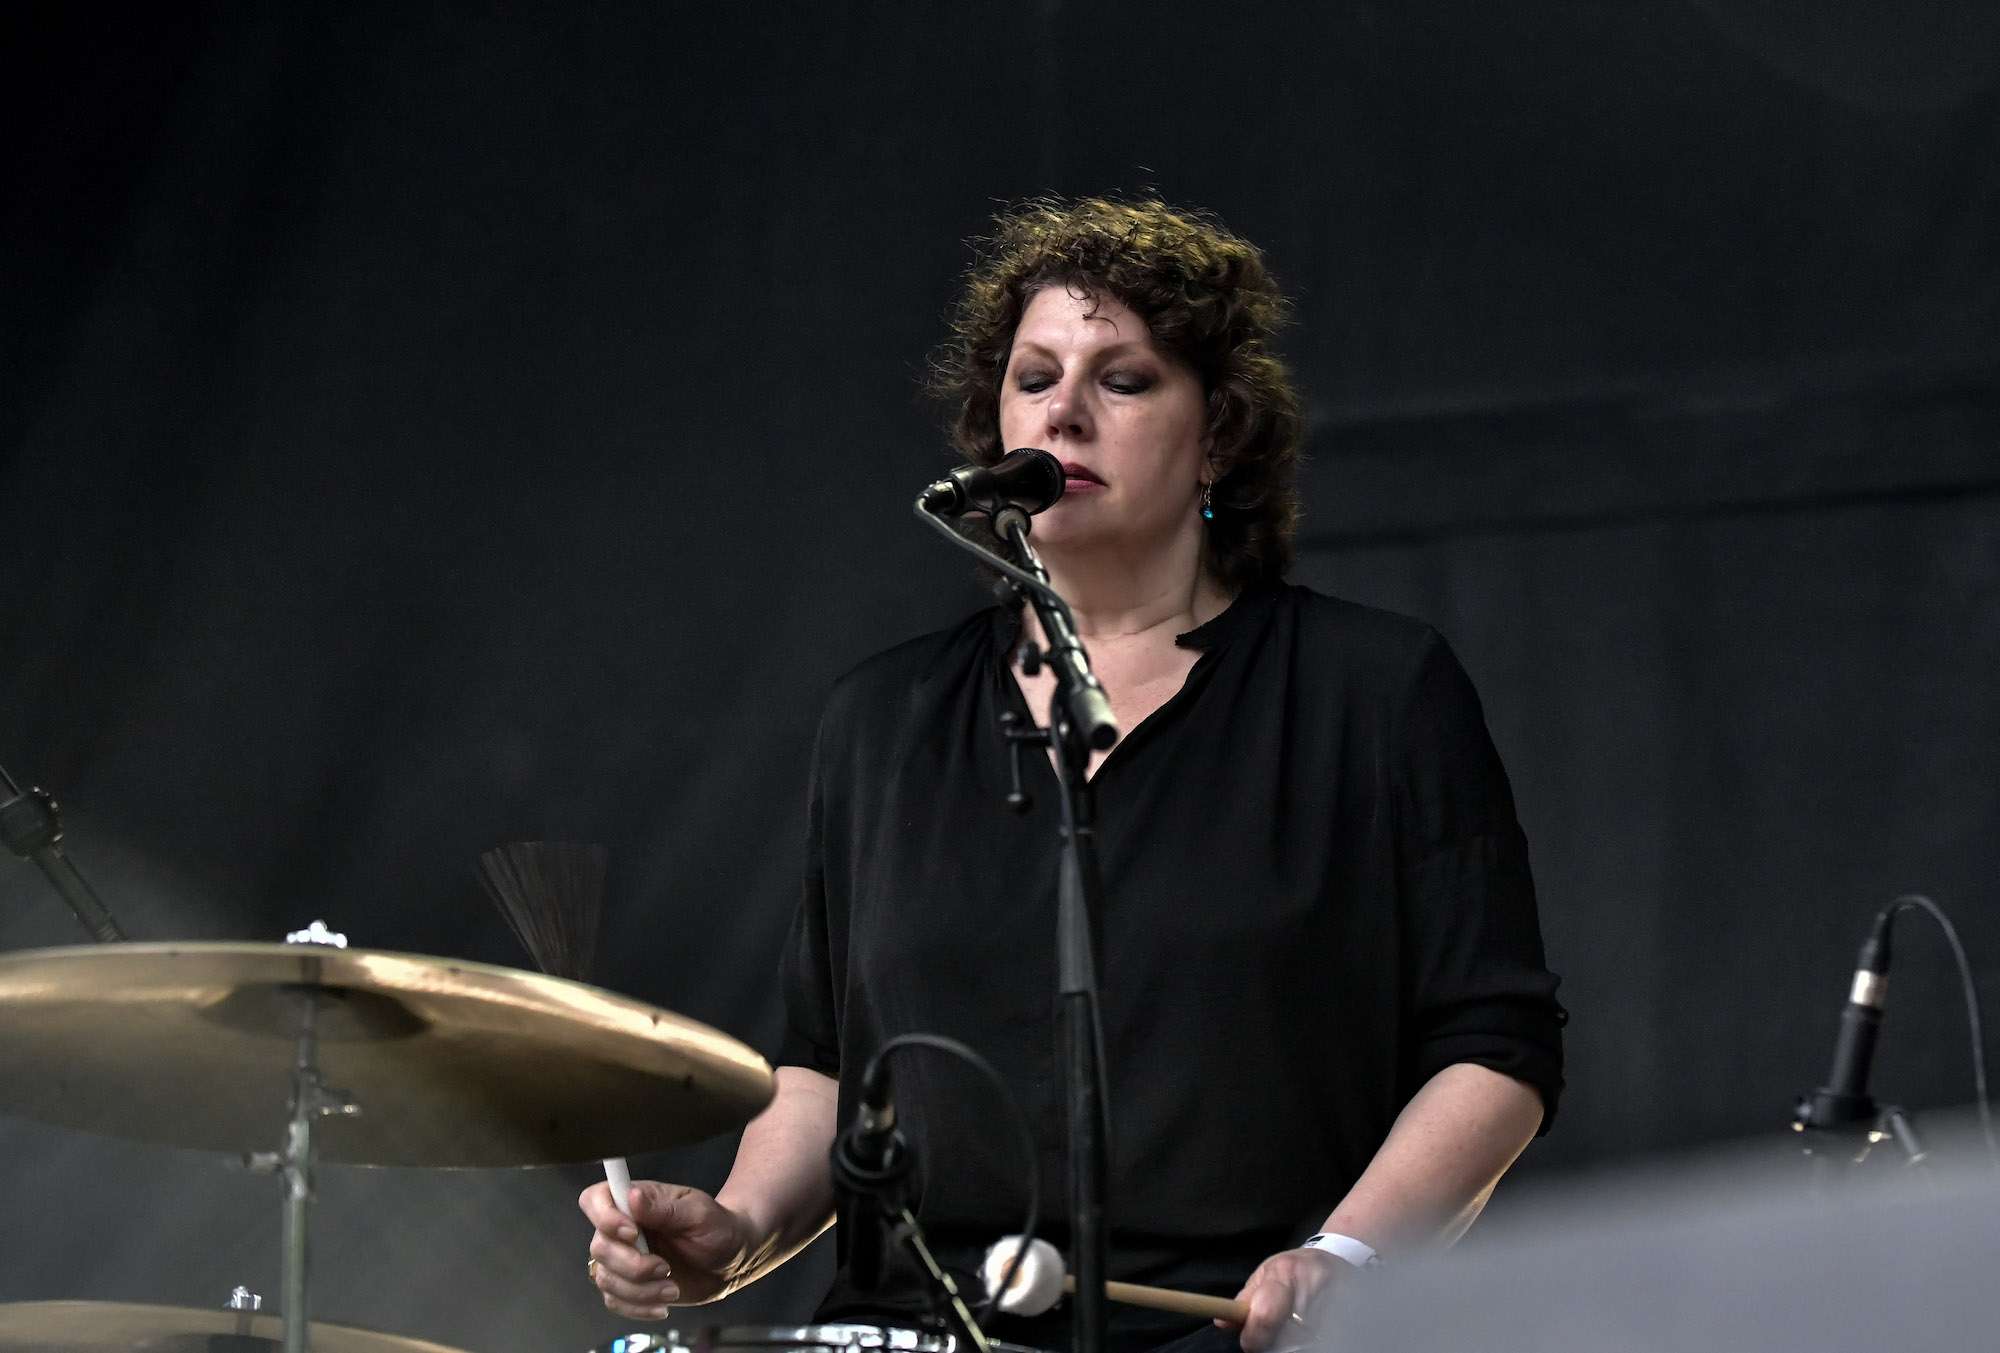 Low Live At Pitchfork [GALLERY] 3